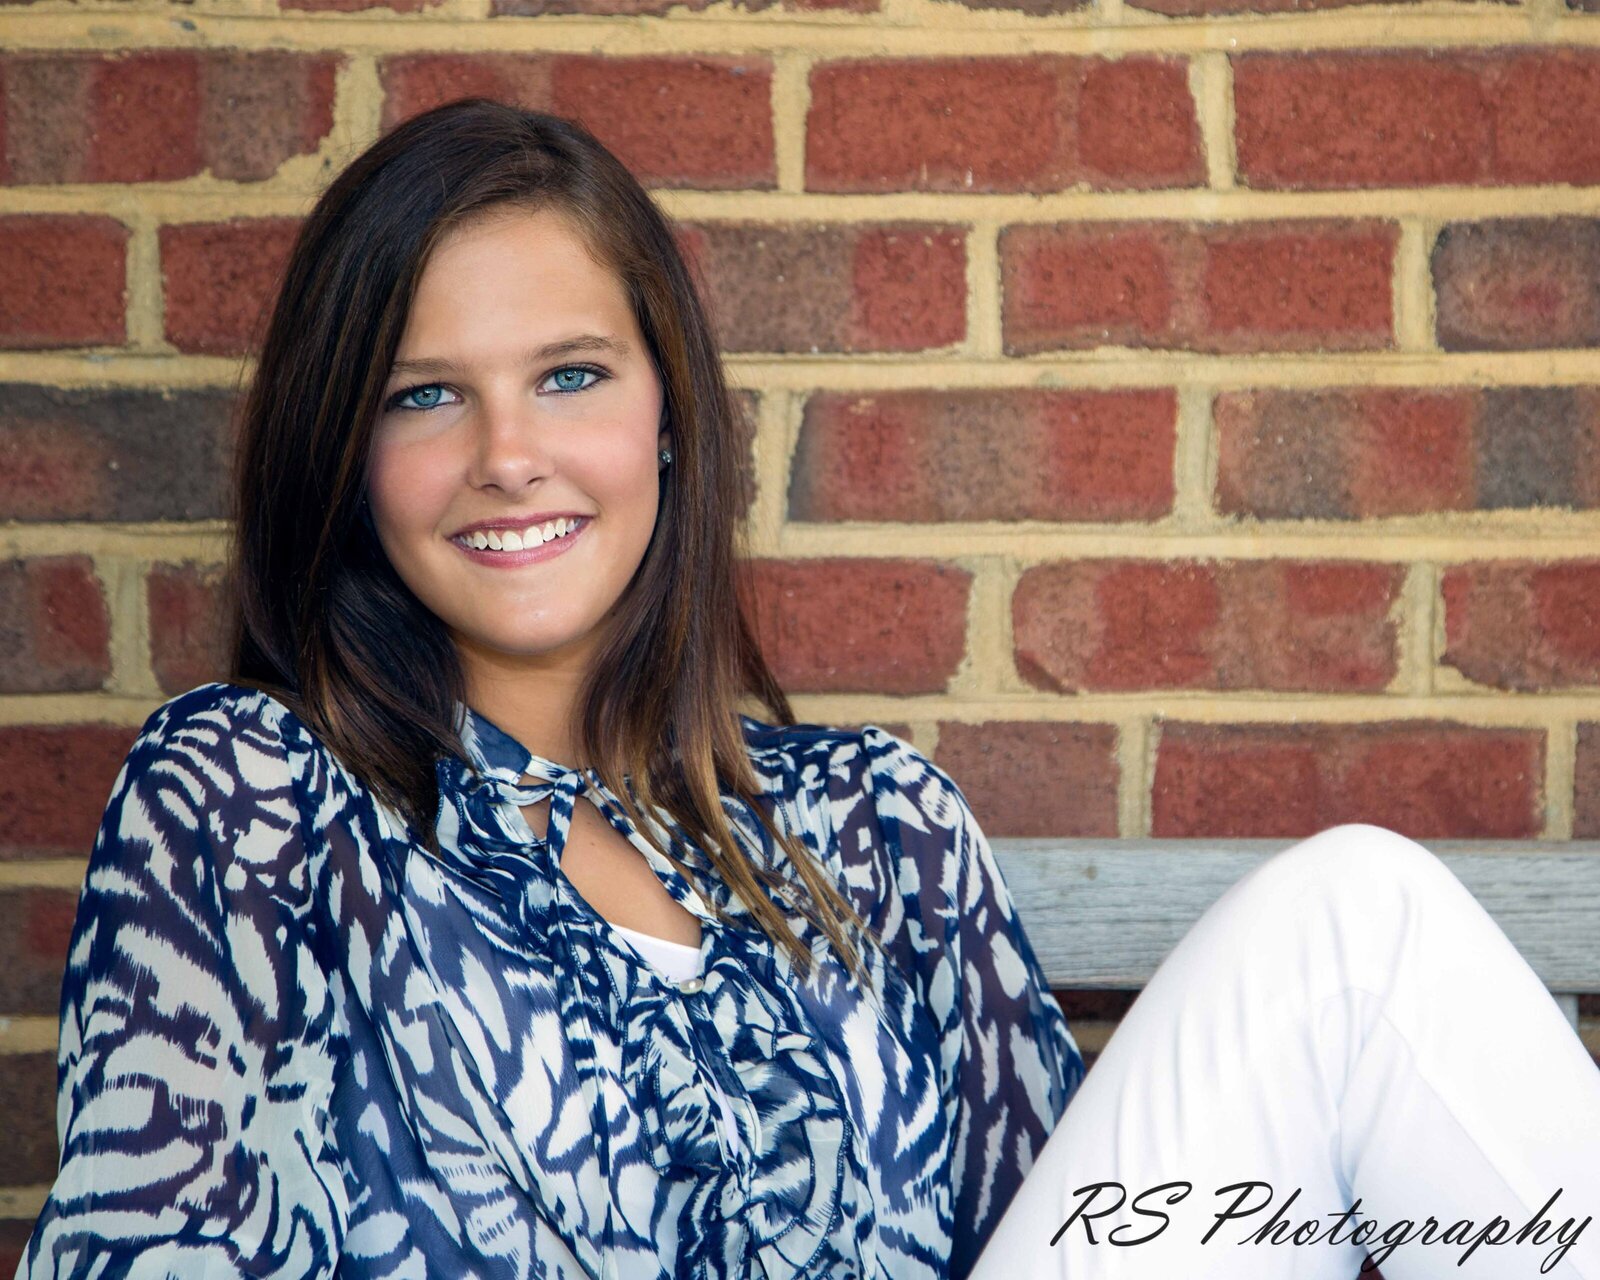 Senior photo shoot in Charlotte against nice brick wall background with Ron Schroll Photography in Charlotte, NC